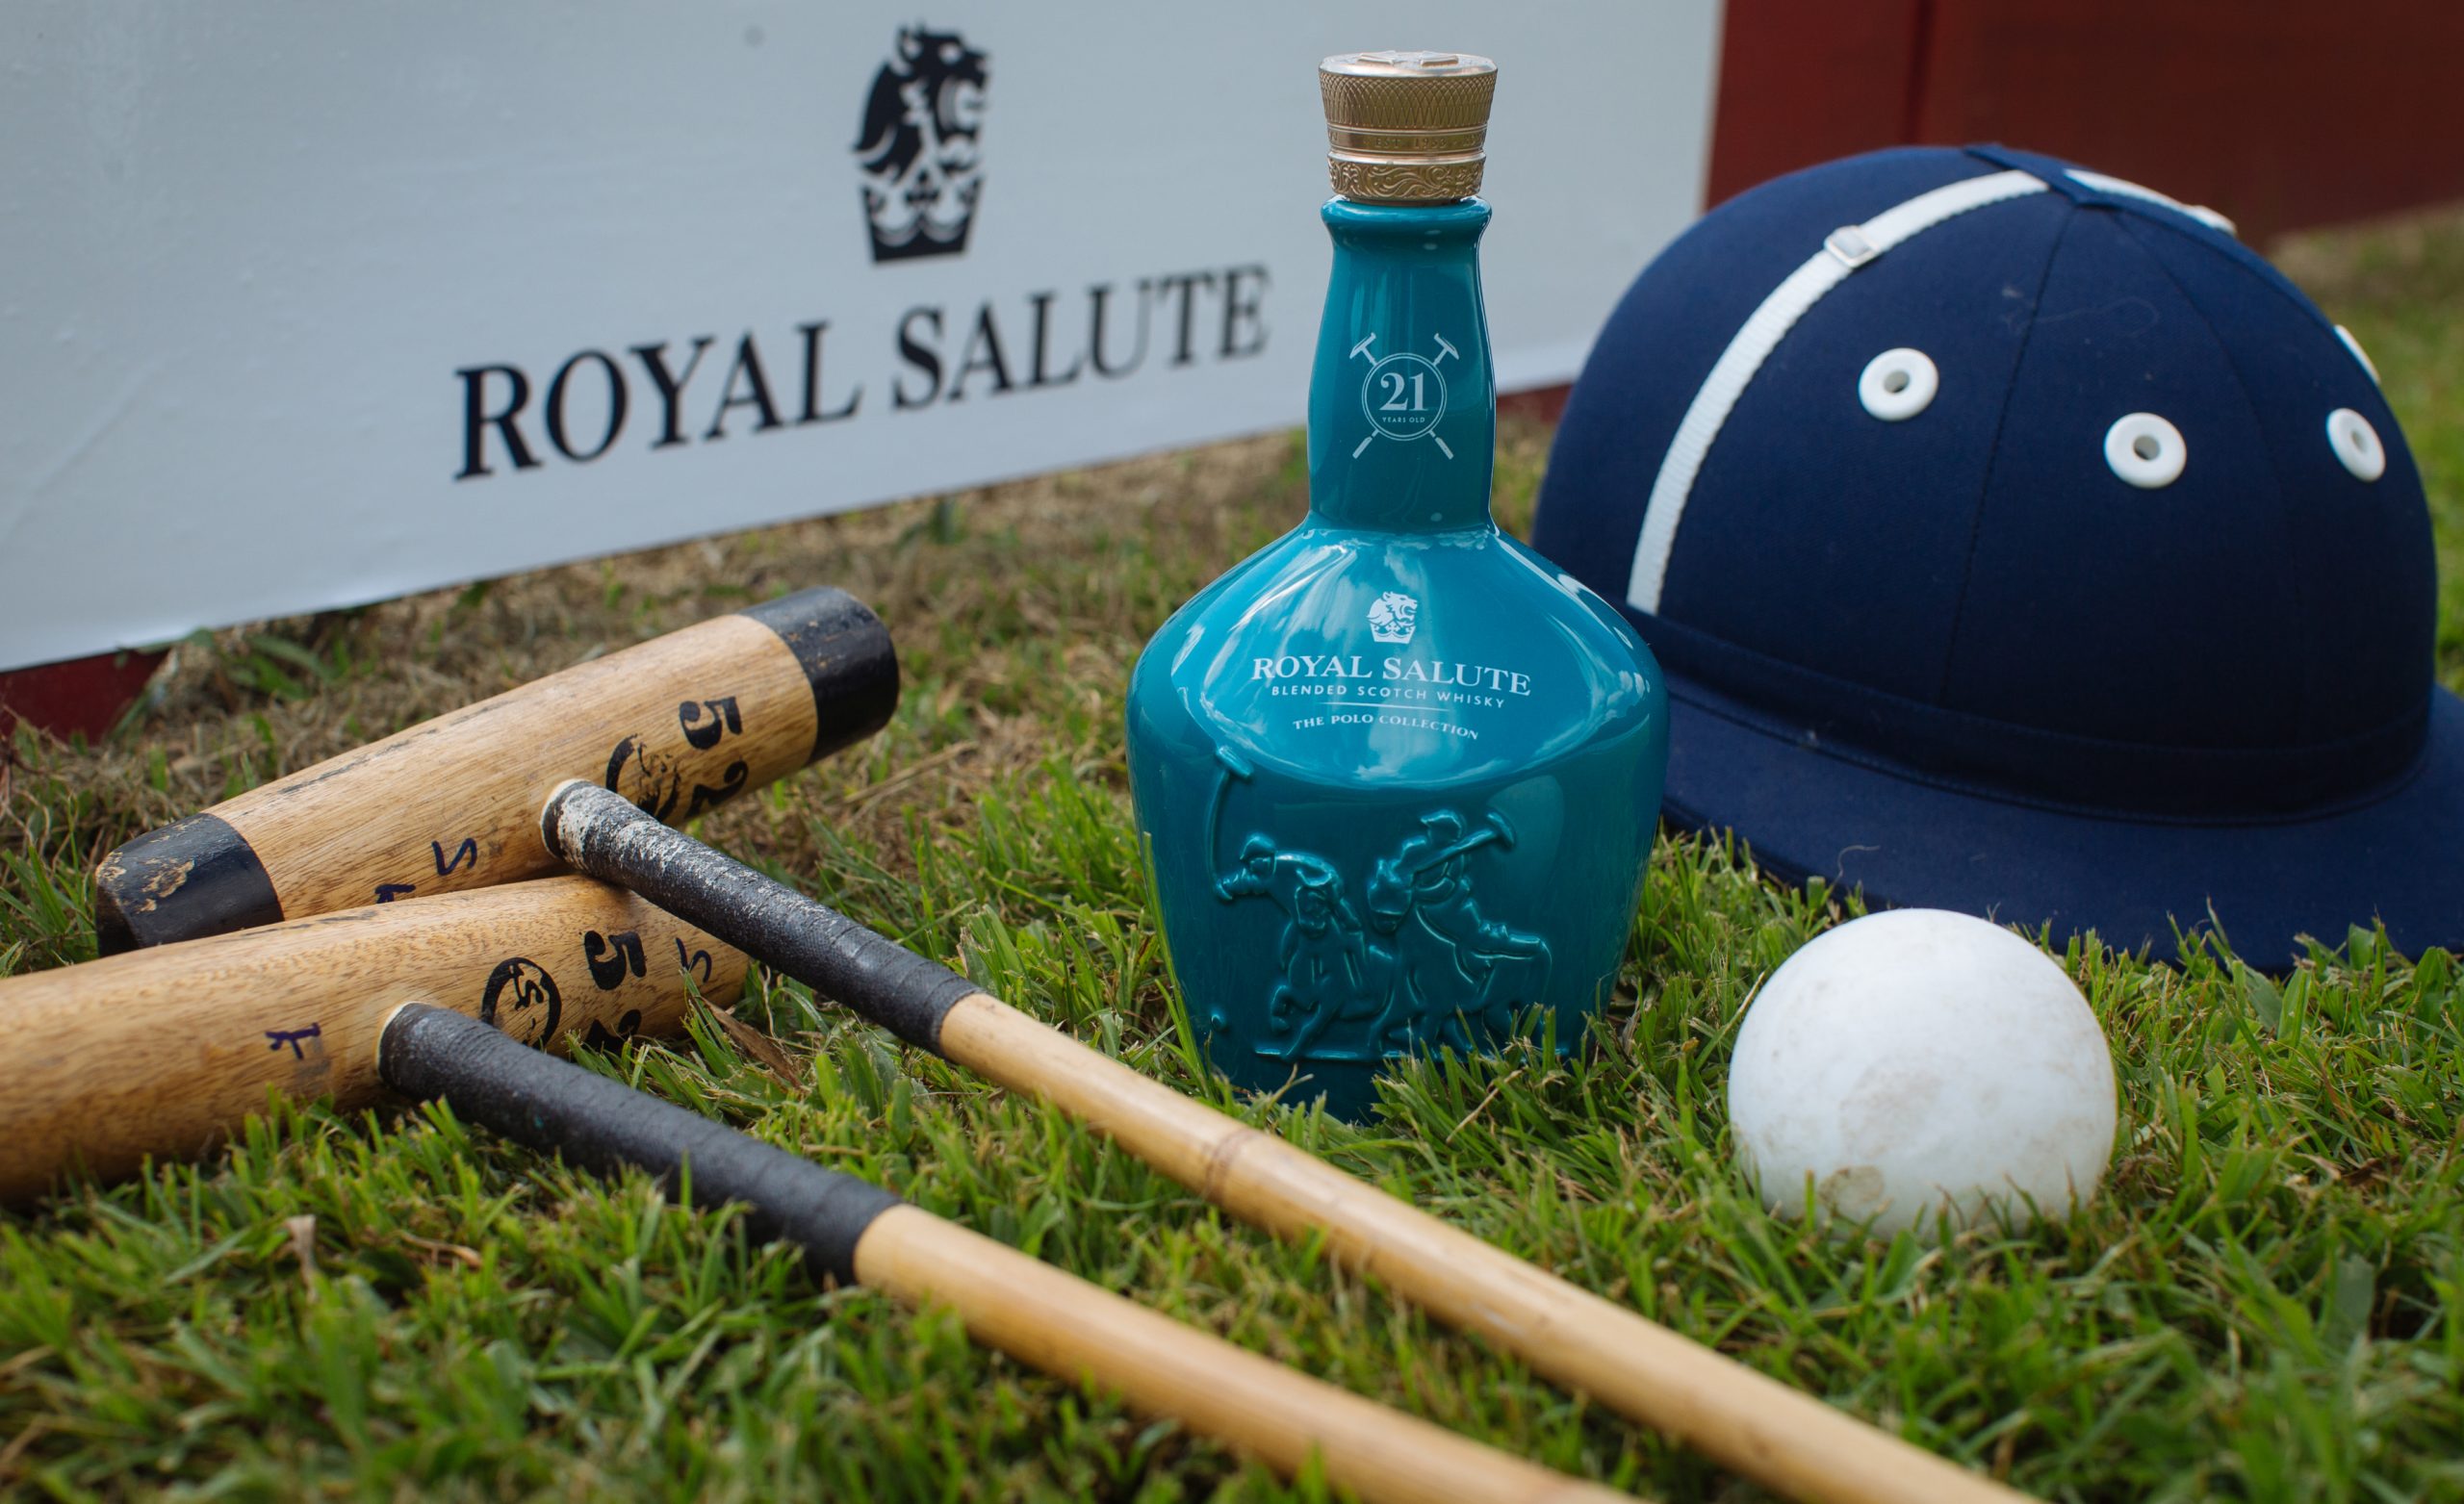 Royal Salute Blended Scotch Whisky The Polo Edition